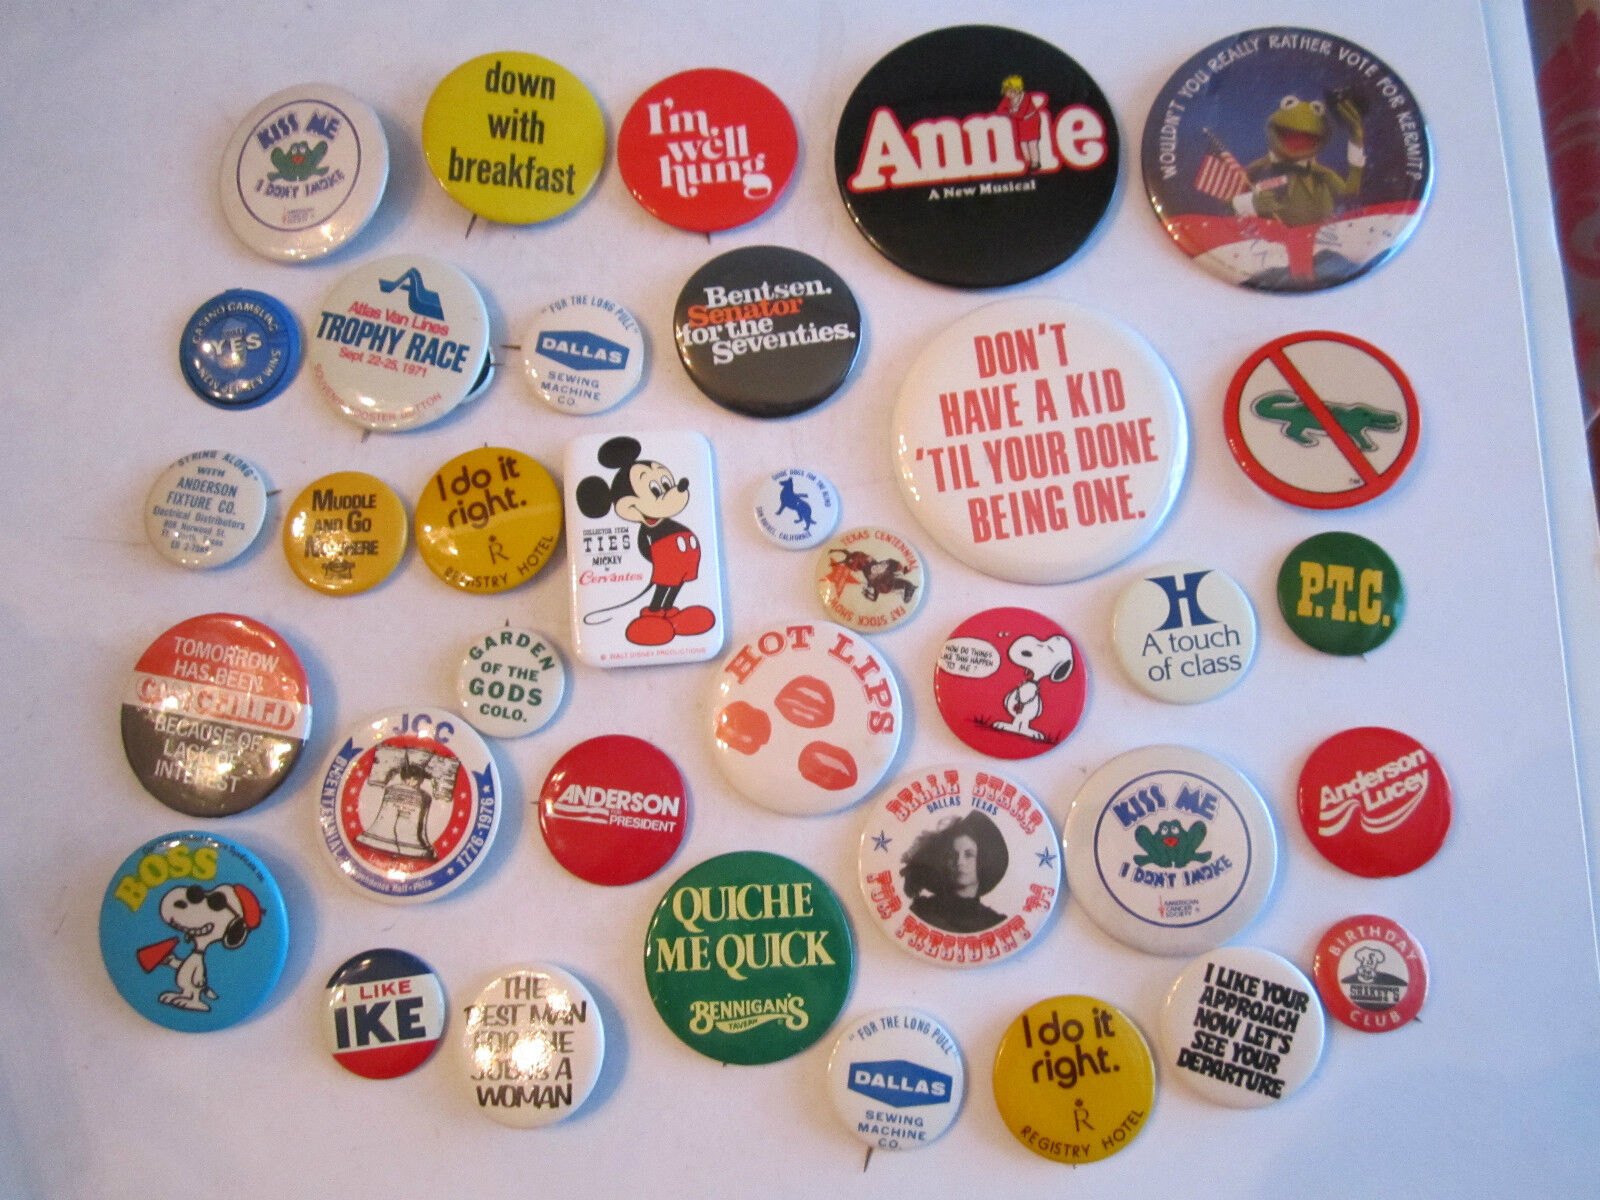 VERY LARGE VINTAGE COLLECTION OF BUTTONS - POLITICAL - COMICAL - SOCIAL - TUB PA